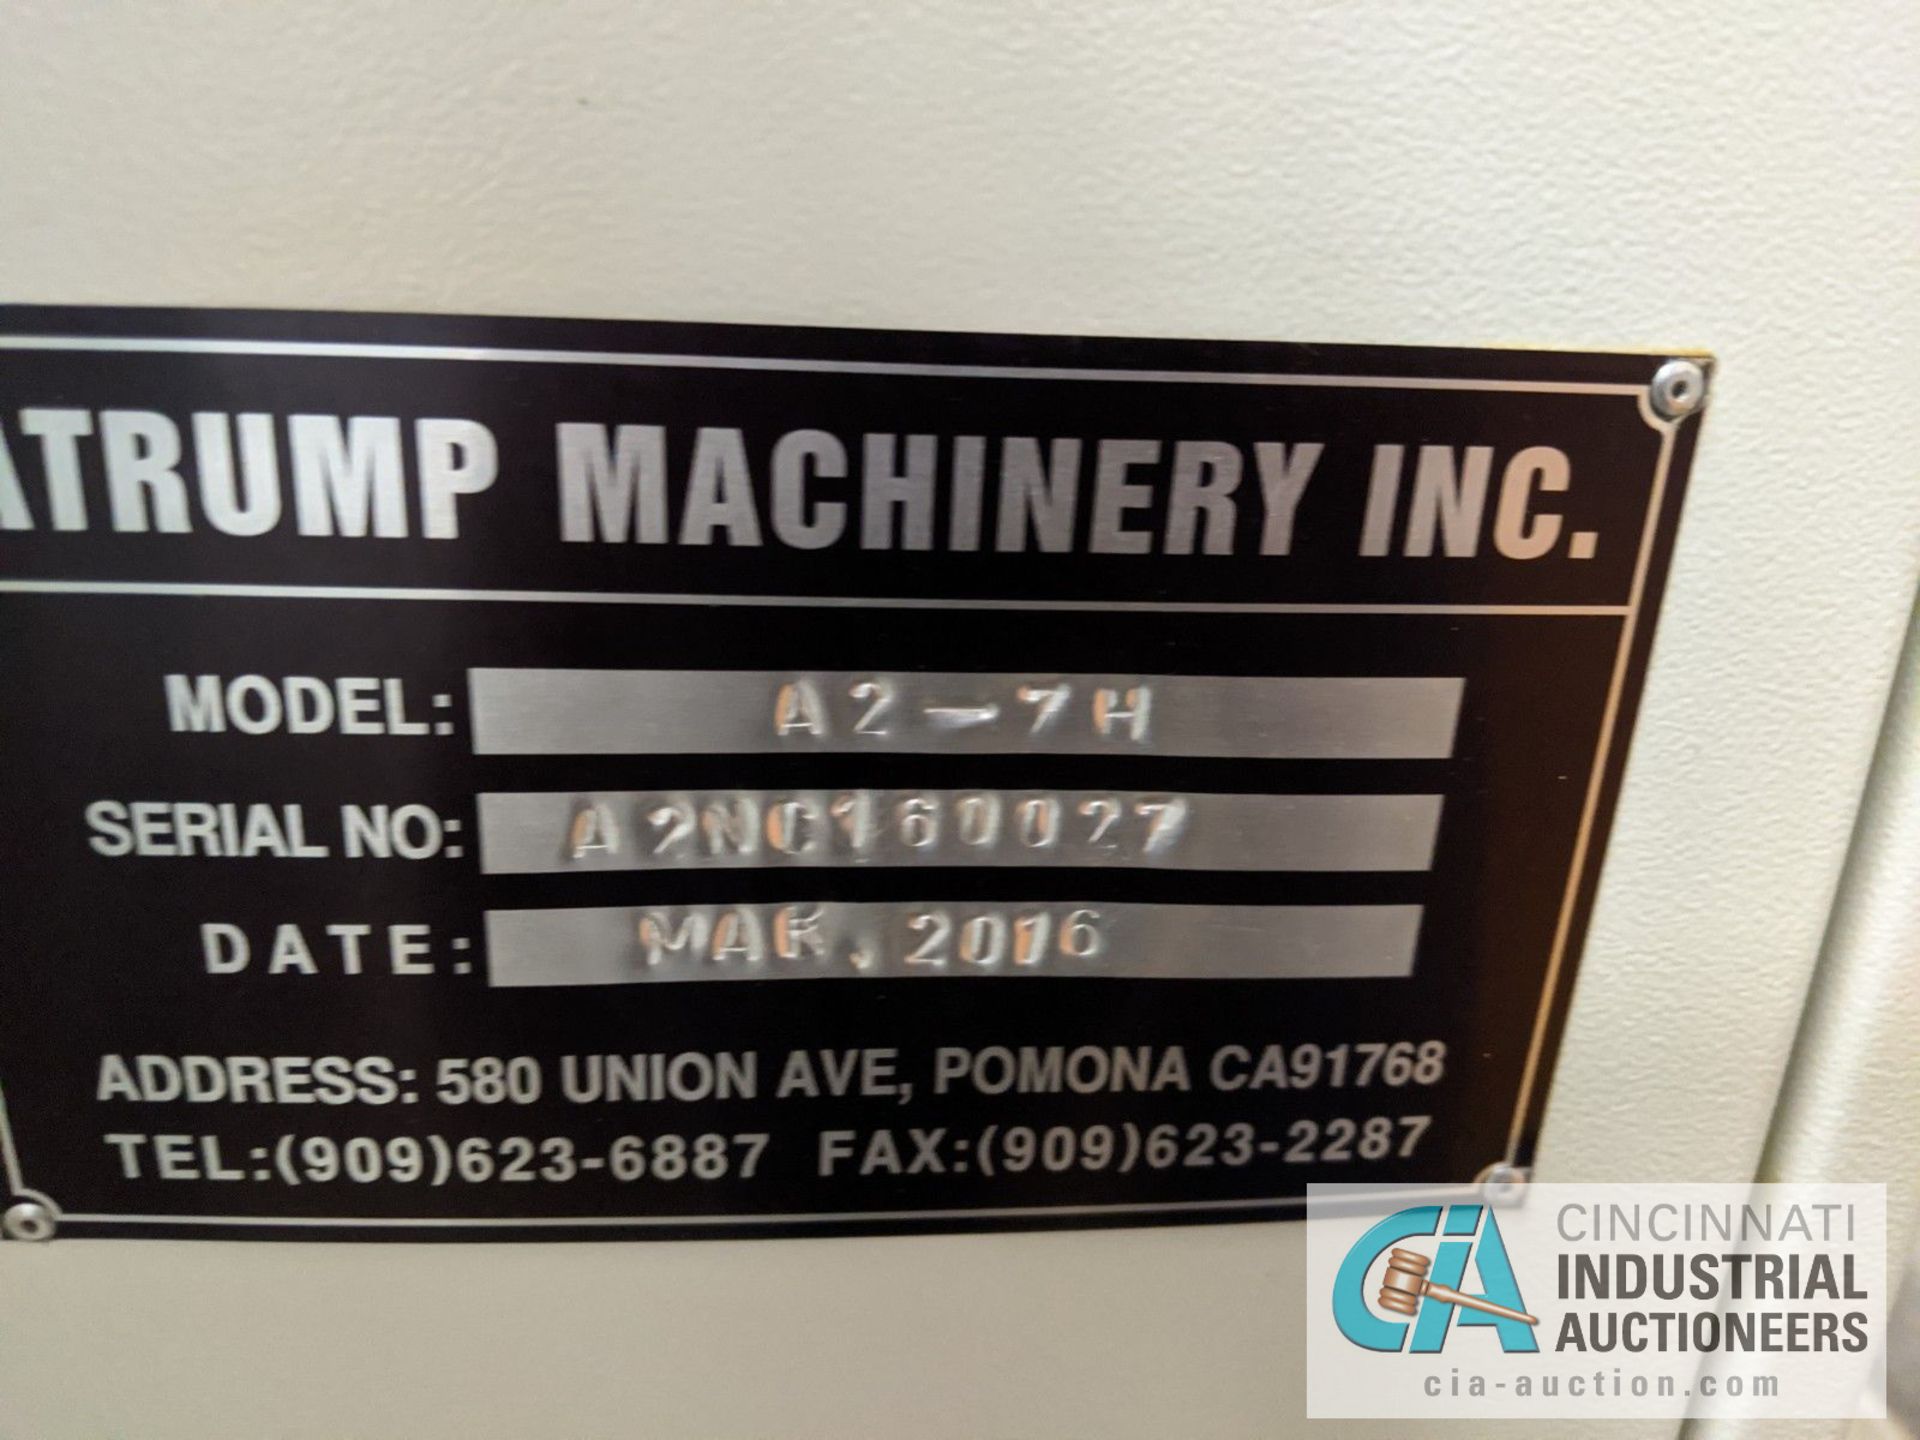 ATRUMP MODEL A2-7H CNC VERTRICAL MACHINING CENTER; S/N A2NC160027, 5.5 KW, 10" X 54" TABLE, X-TRAVEL - Image 6 of 9